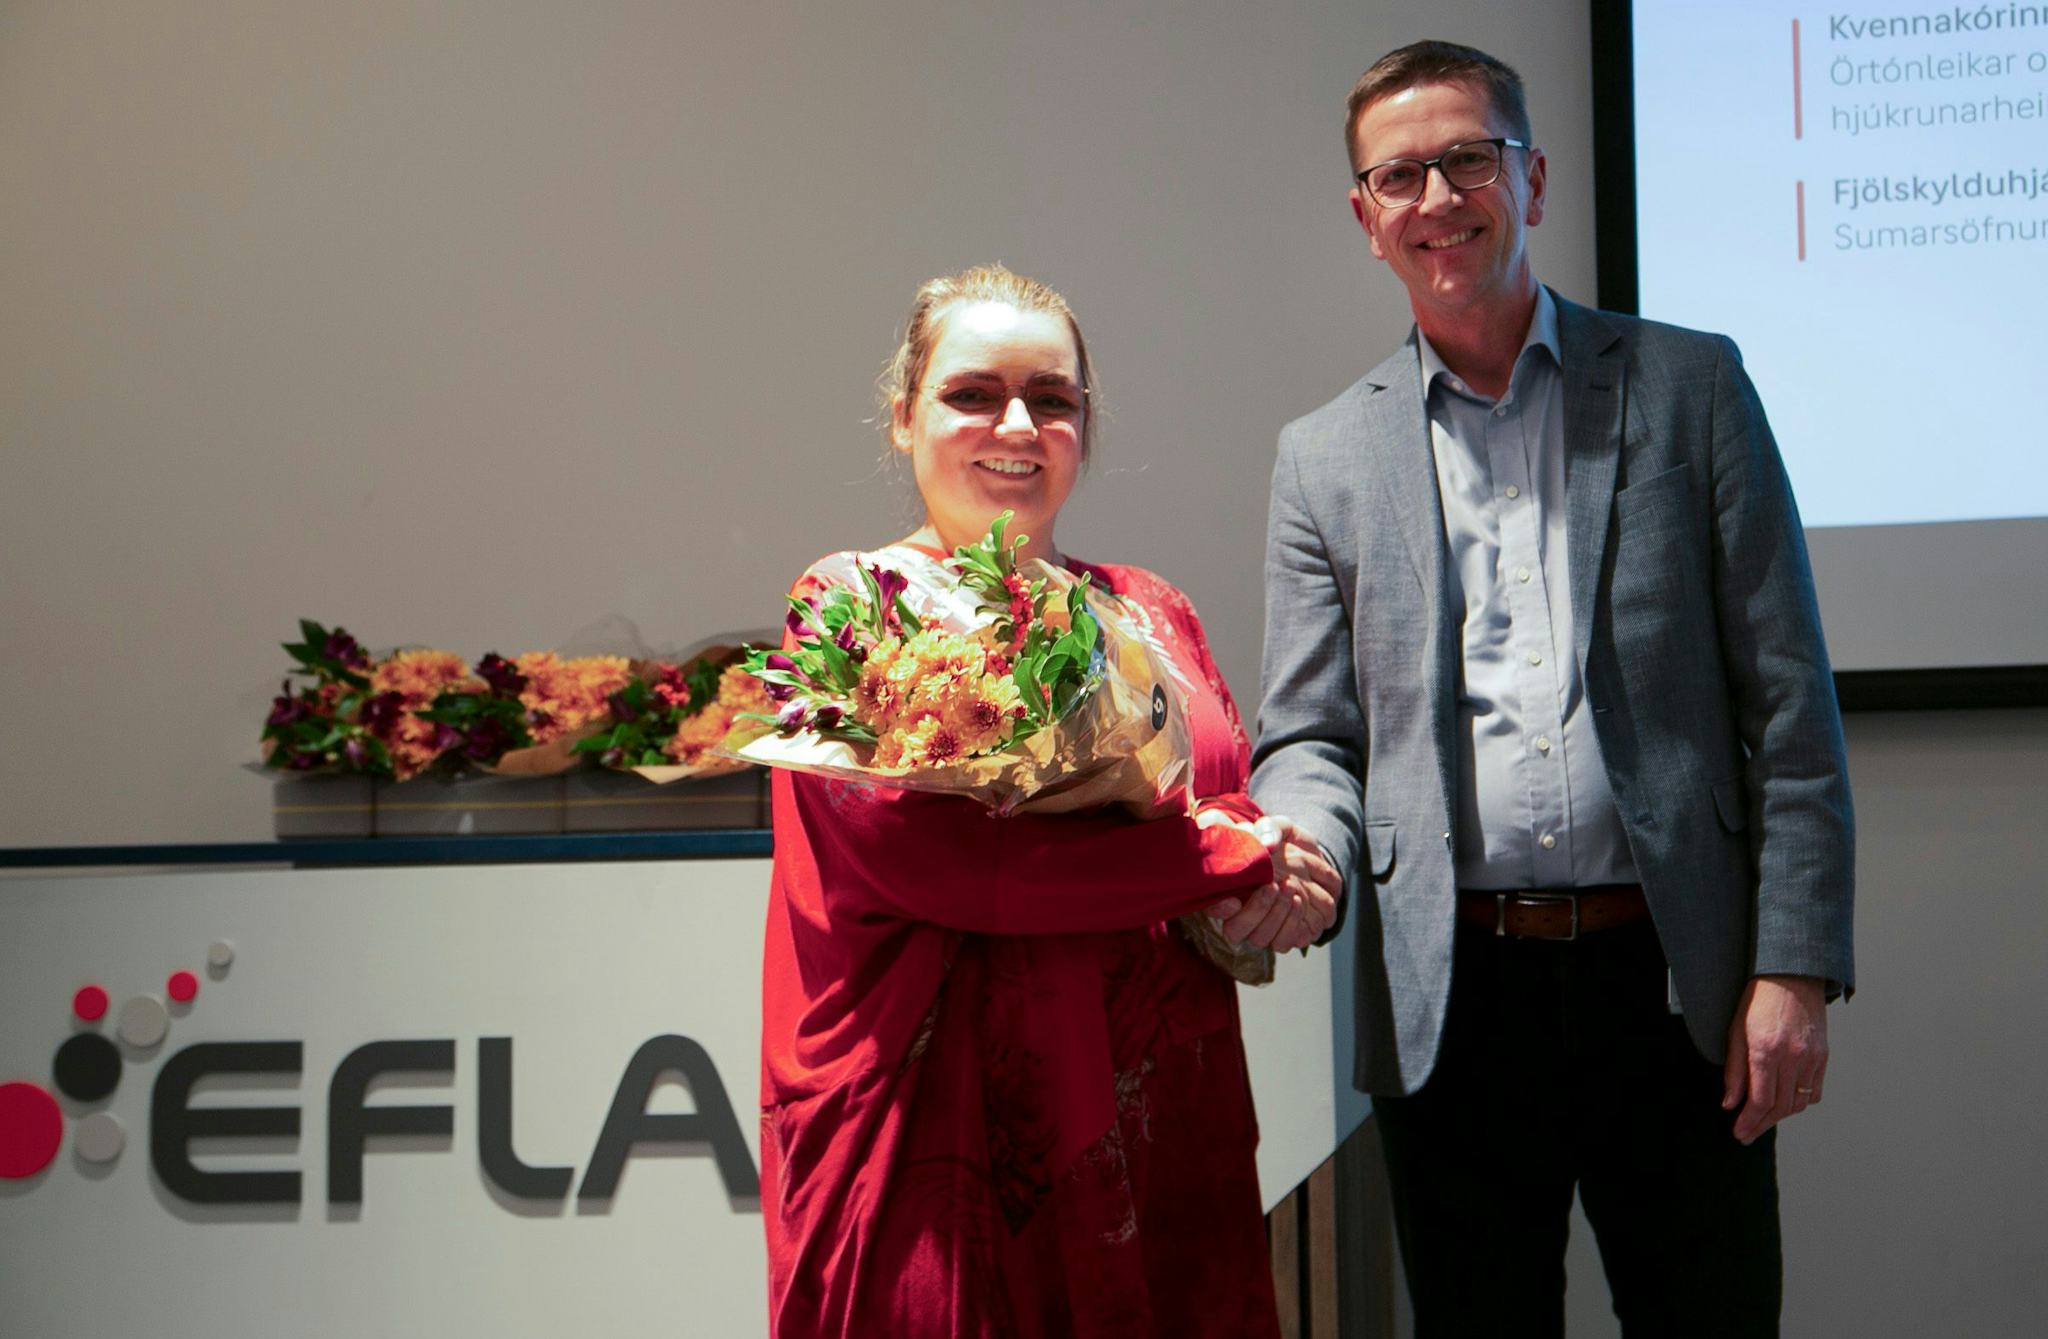 Two individuals shaking hands, one holding bouquet of flowers